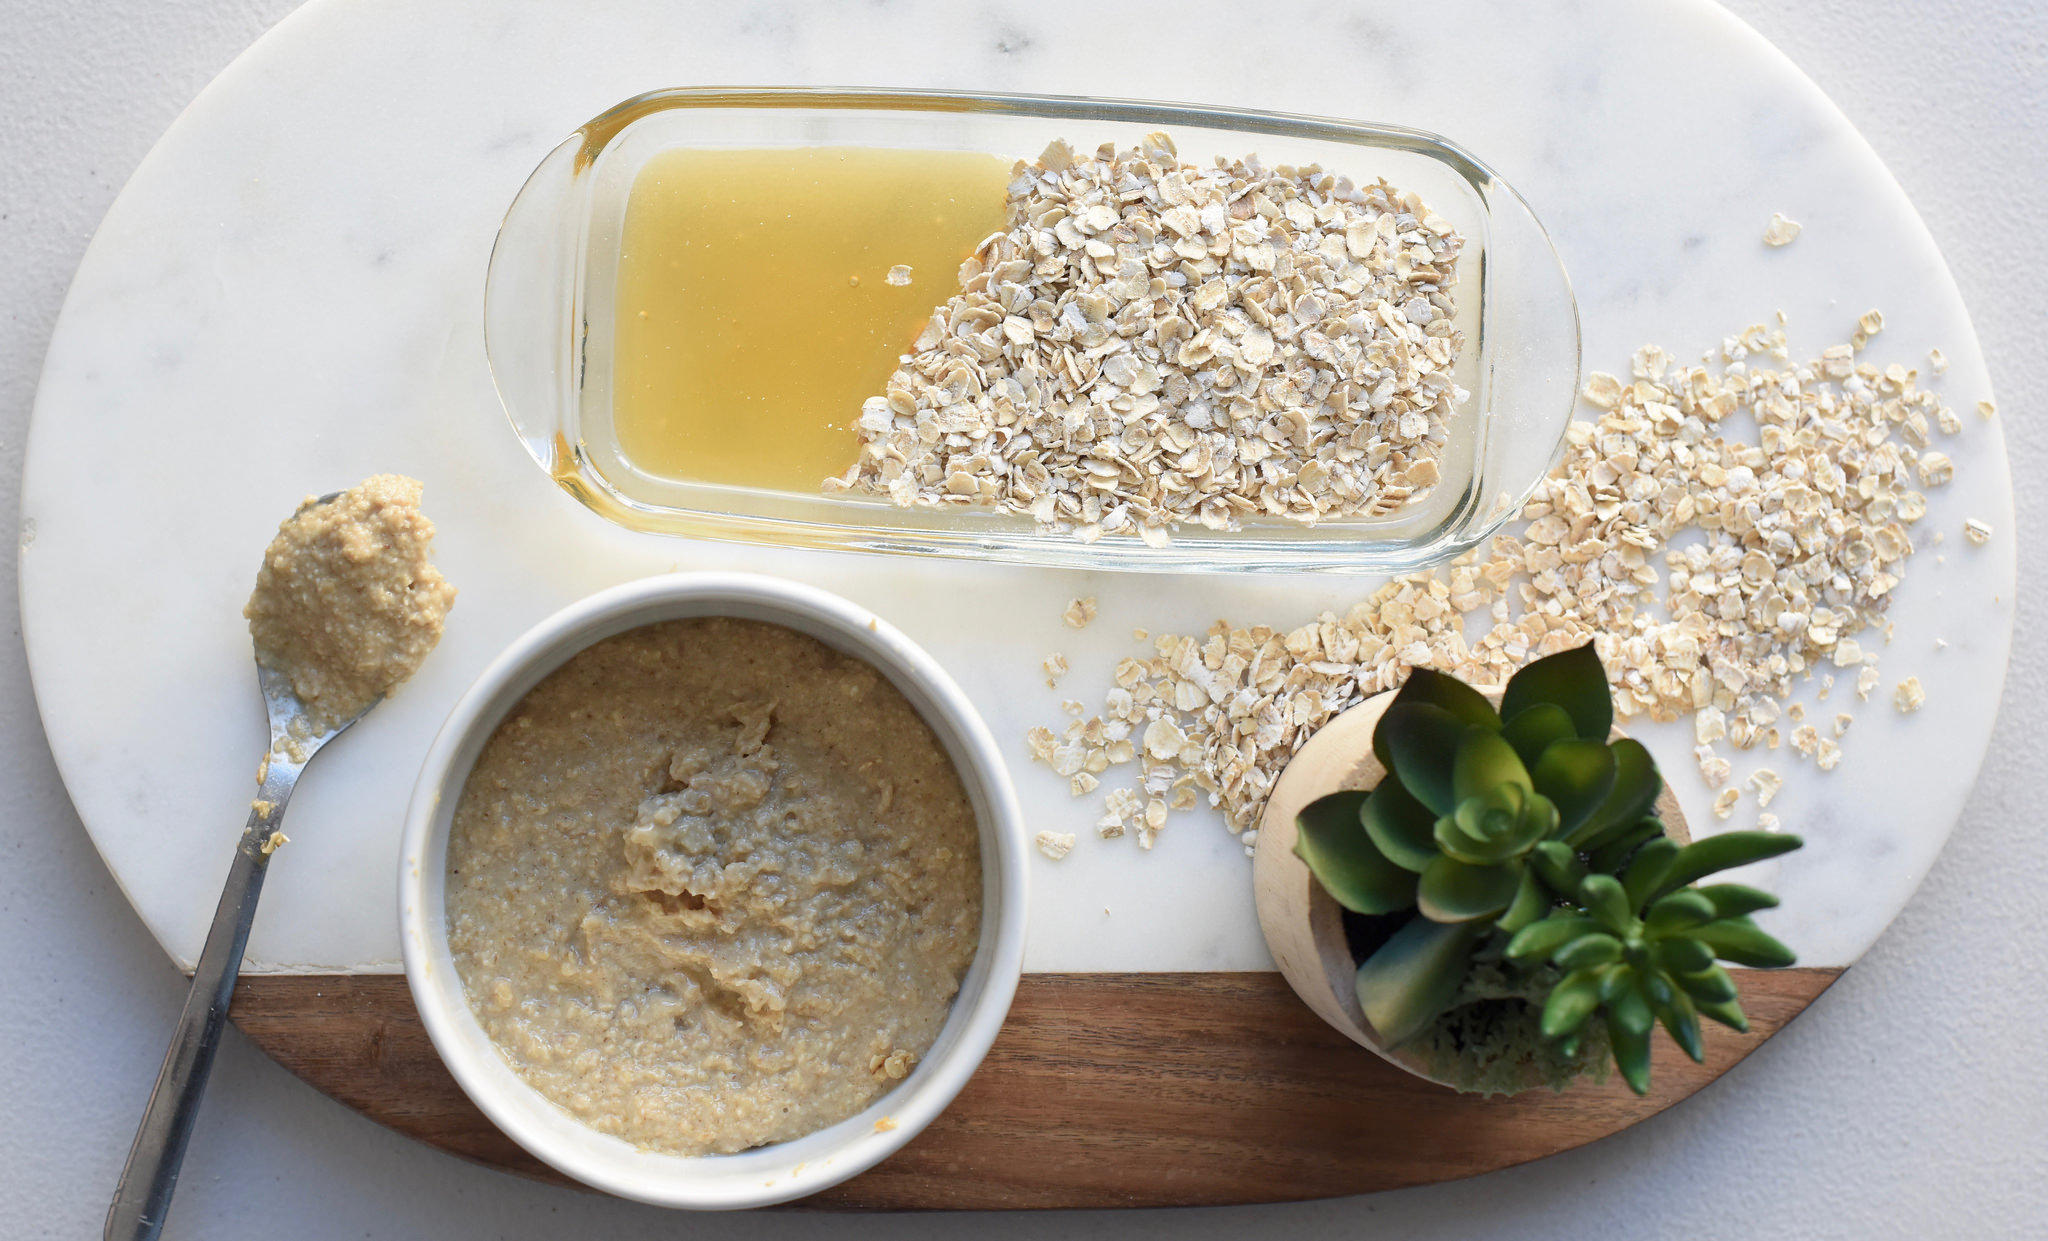 Gentle Exfoliation with Oatmeal: